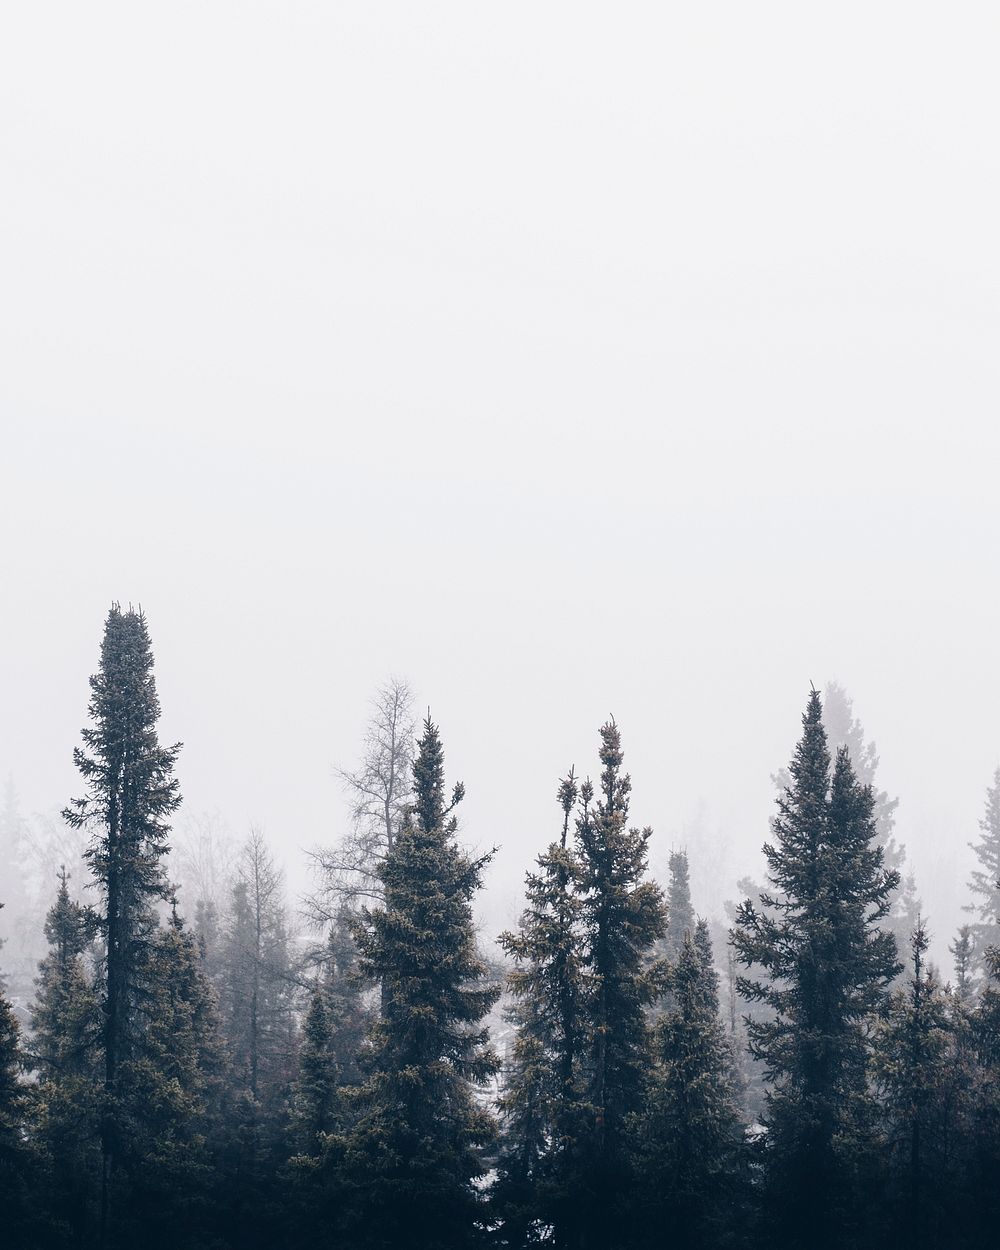 Tall pine trees shrouded in mist against a pale sky. Original public domain image from Wikimedia Commons